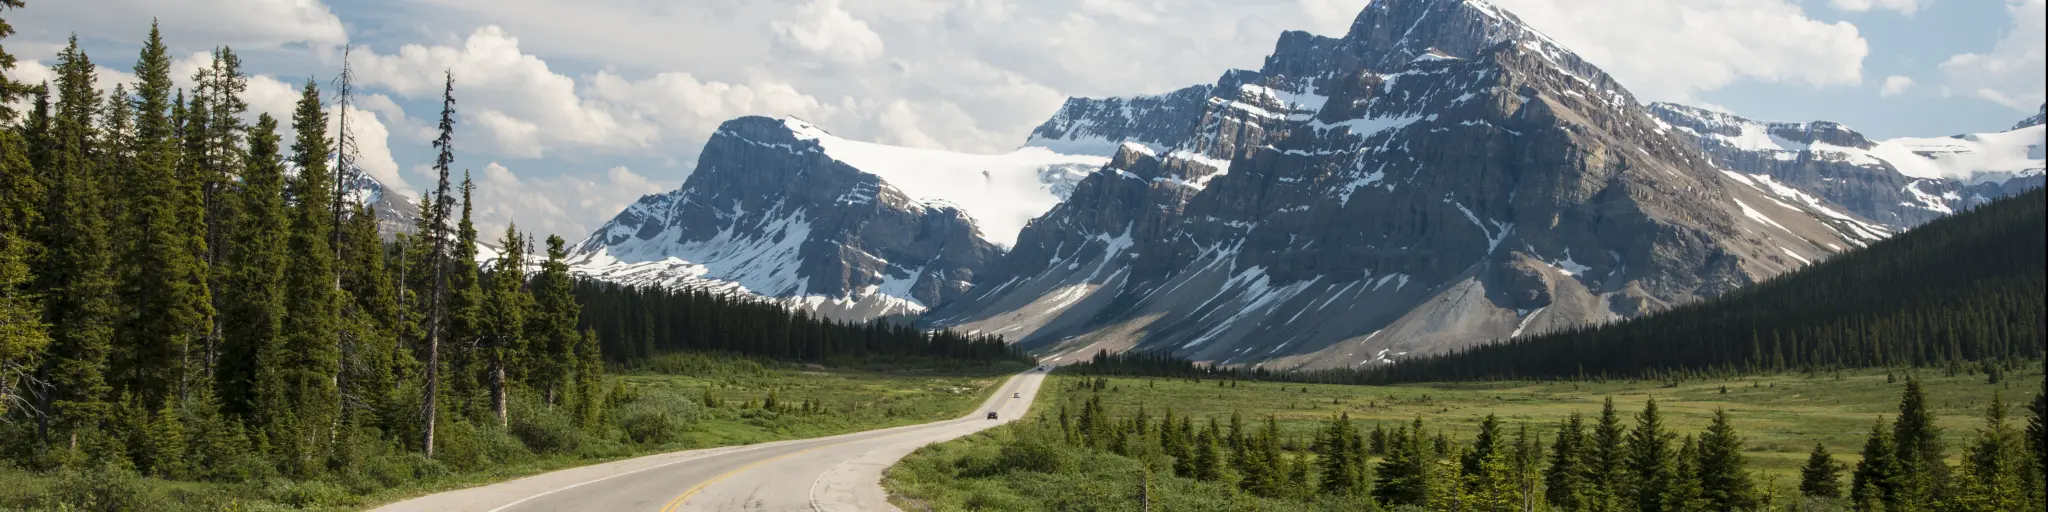 Scenic highway passing through the Banff National Park in Alberta, Canada.